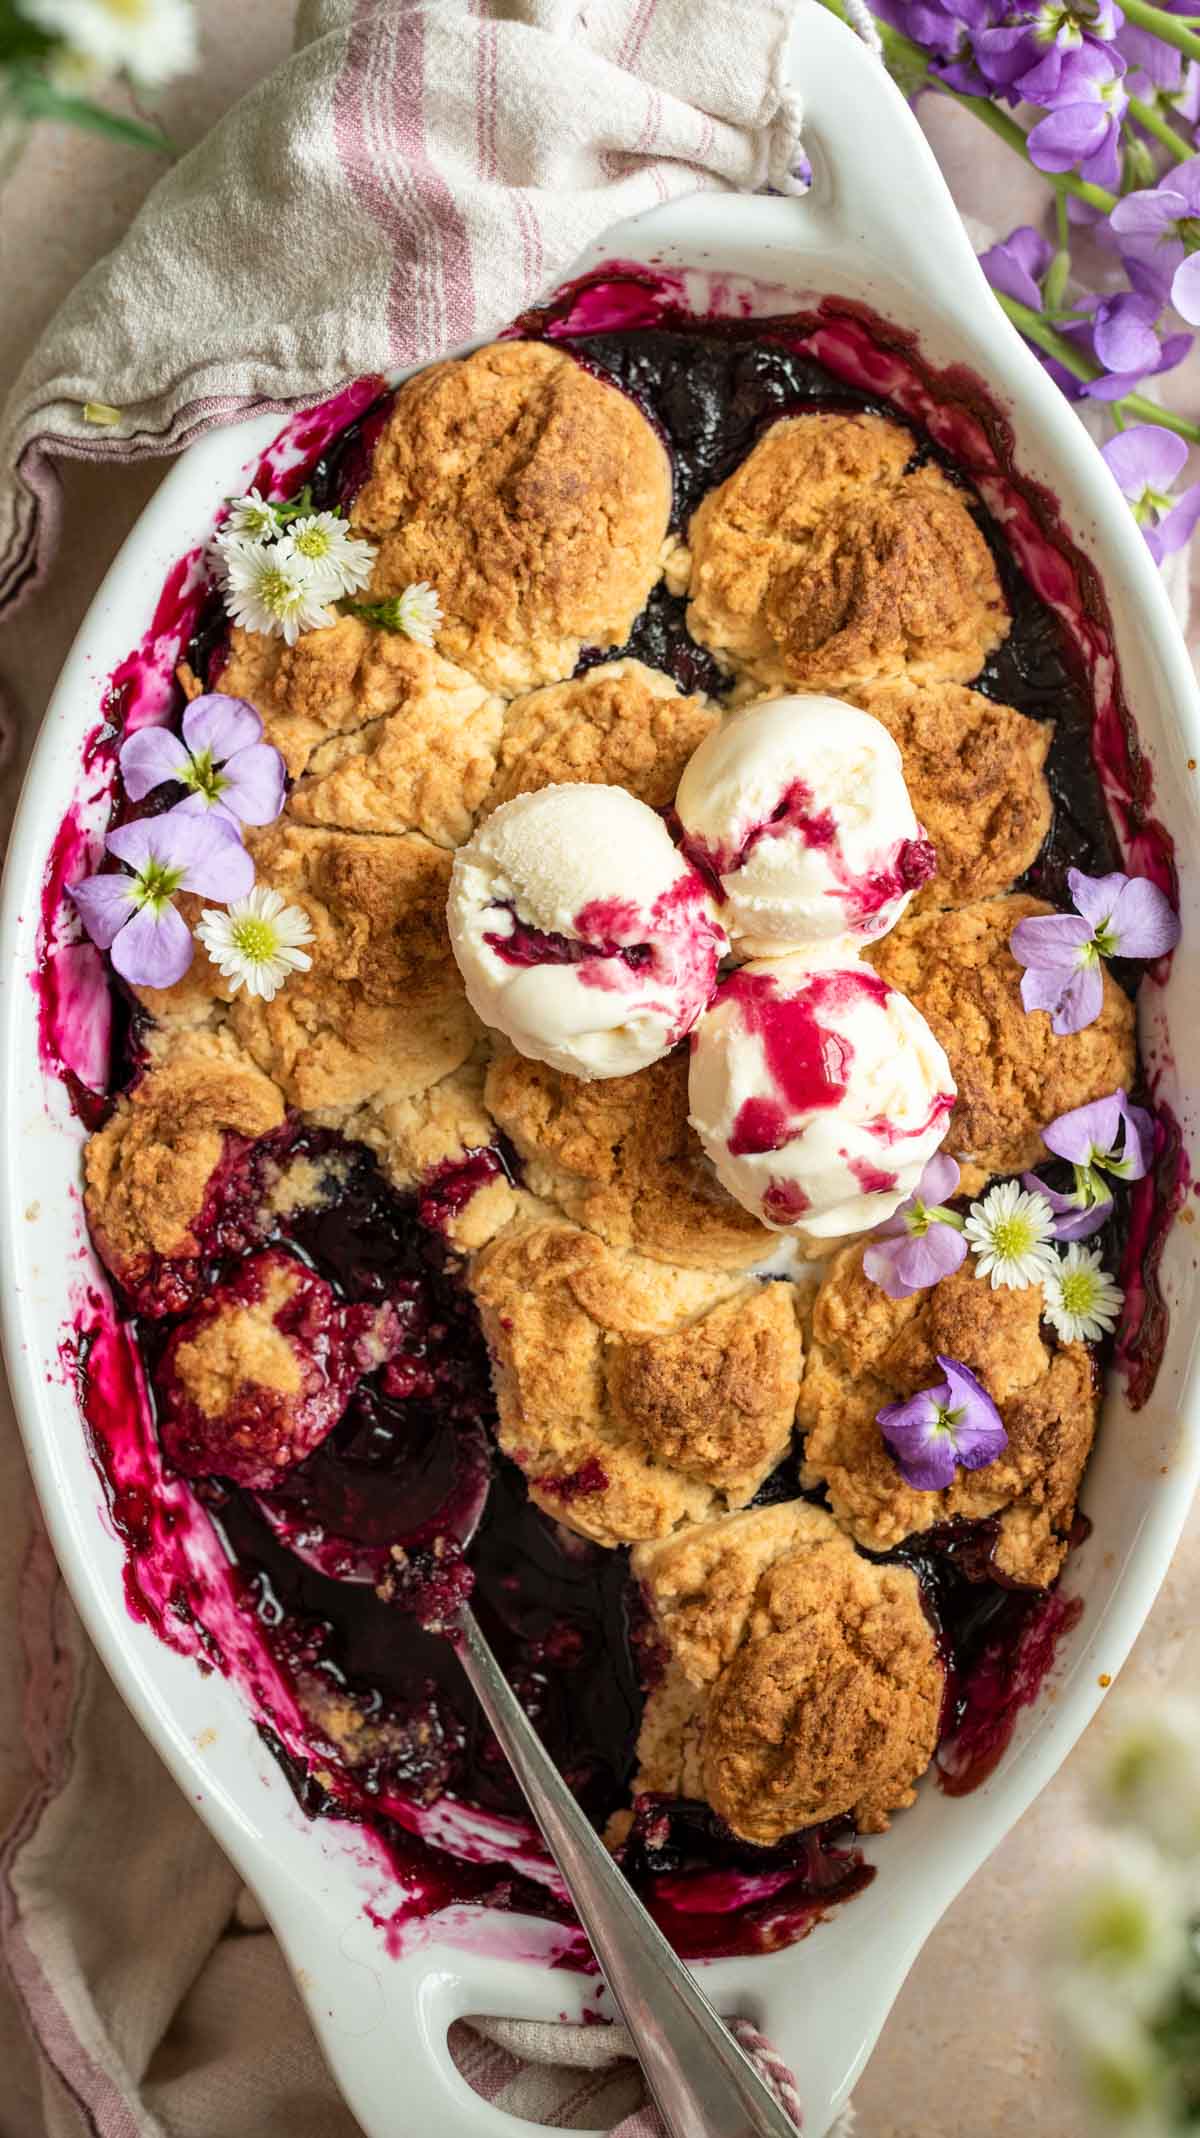 Blueberry cobbler in a baking dish with a scoop taken out and ice cream on top.